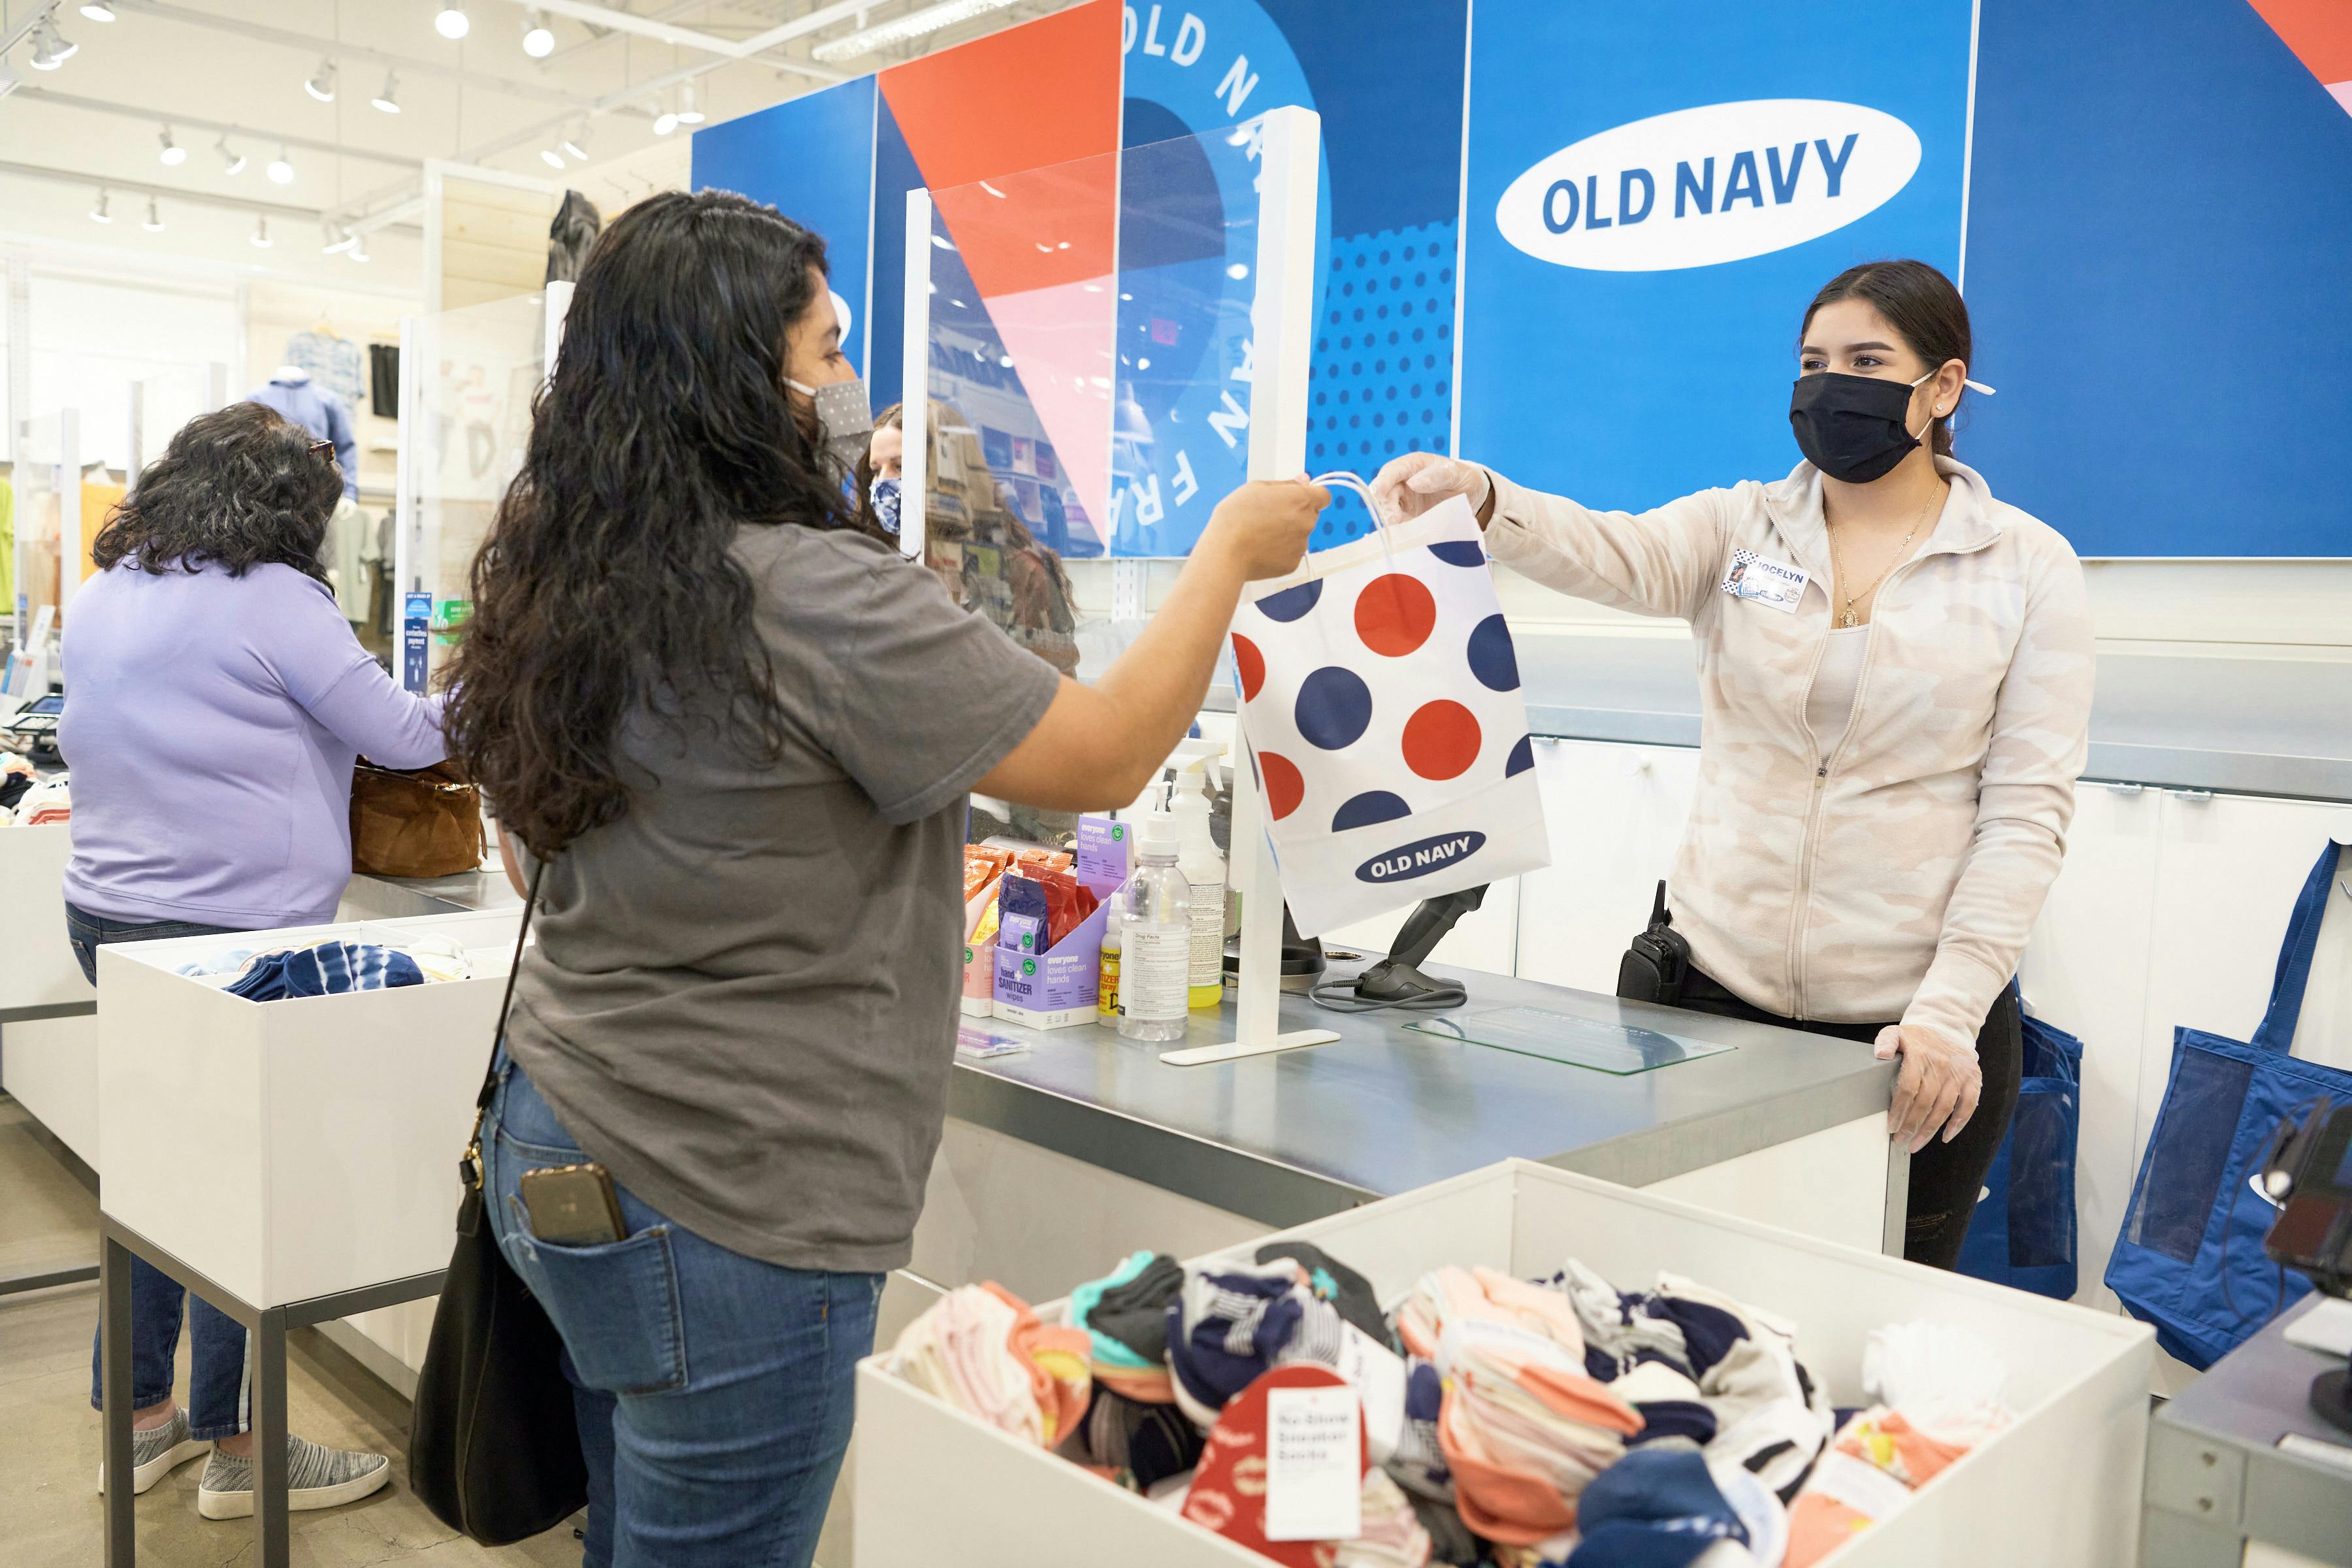 An Old Navy employee handing a customer her bag over the checkout counter at Old Navy.